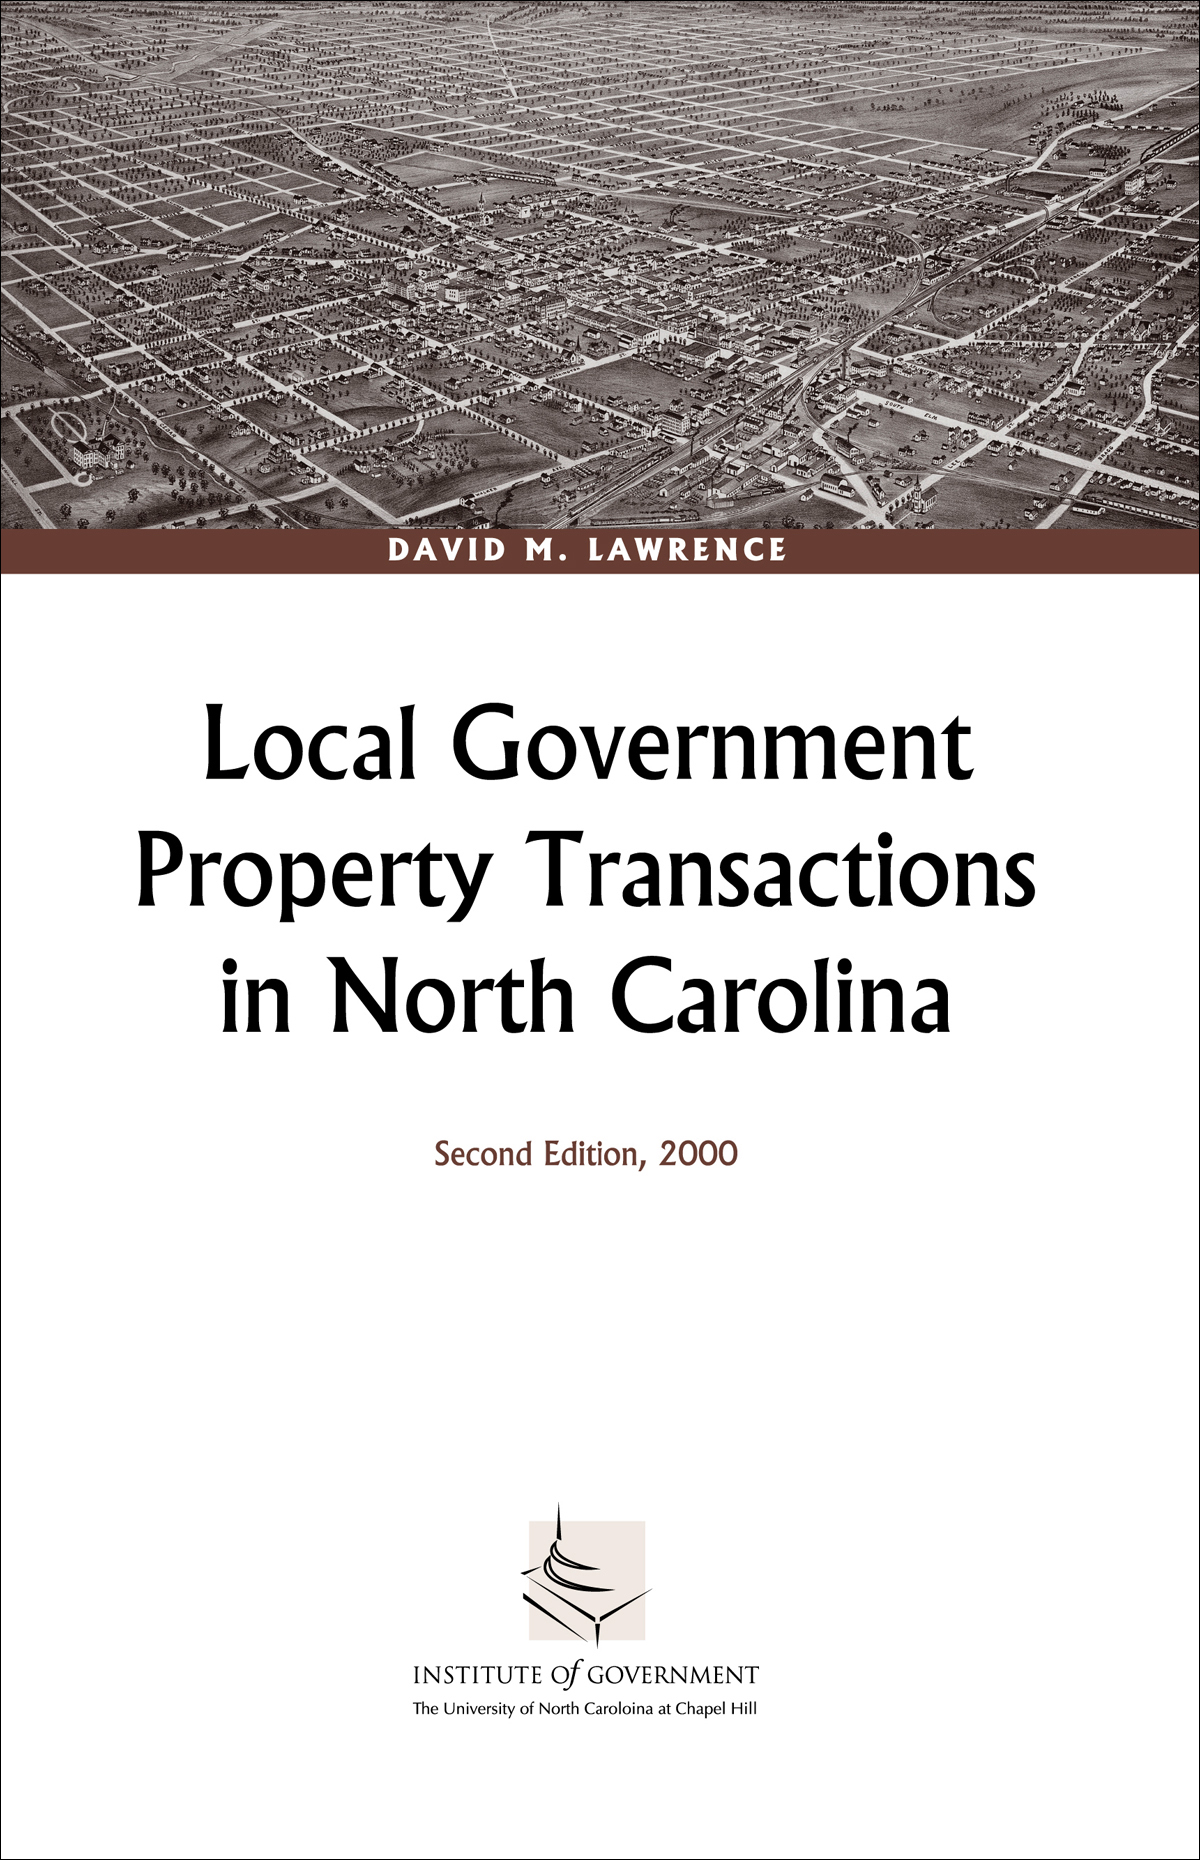 Local Government Property Transactions in North Carolina, Second Edition, 2000